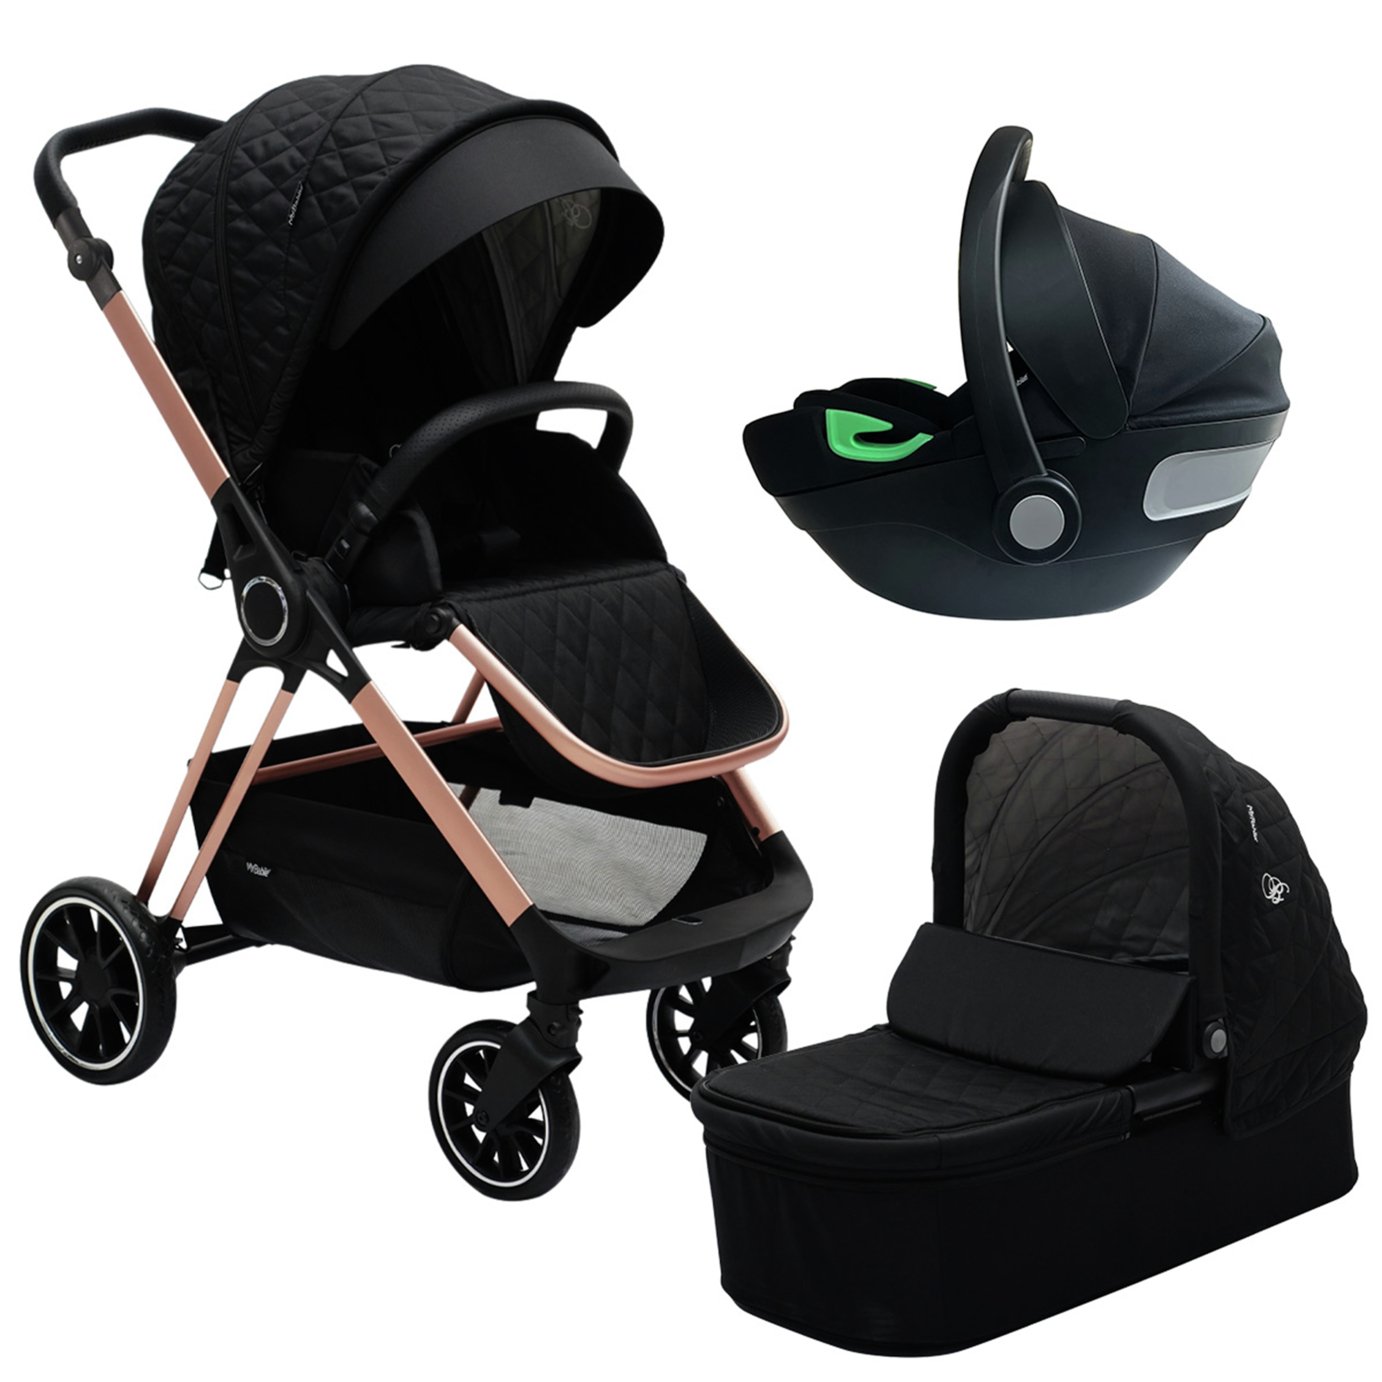 My Babiie MB250i Billie Faiers Black Quilted Travel System